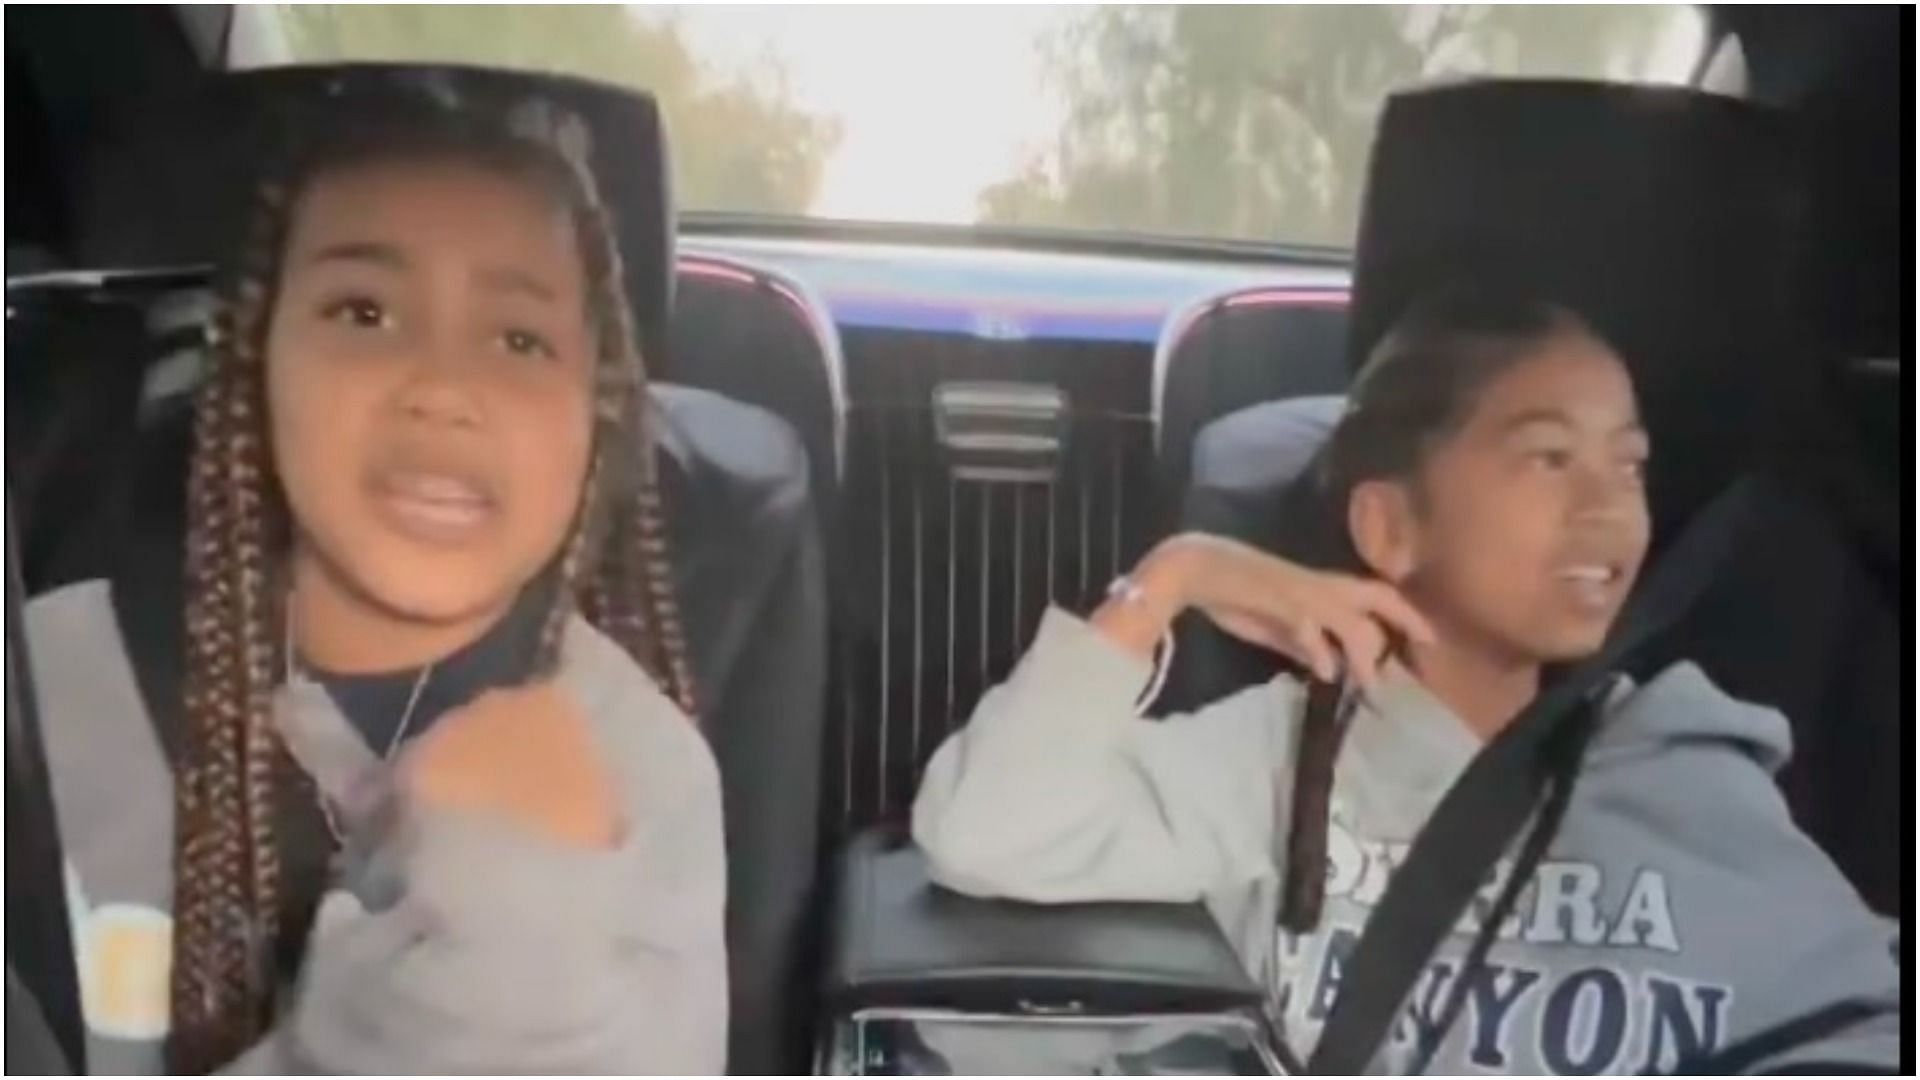 North West&#039;s video singing &quot;We Don&#039;t Talk About Bruno&quot; has many fans. (Image via Kim Kardashian/Instagram)